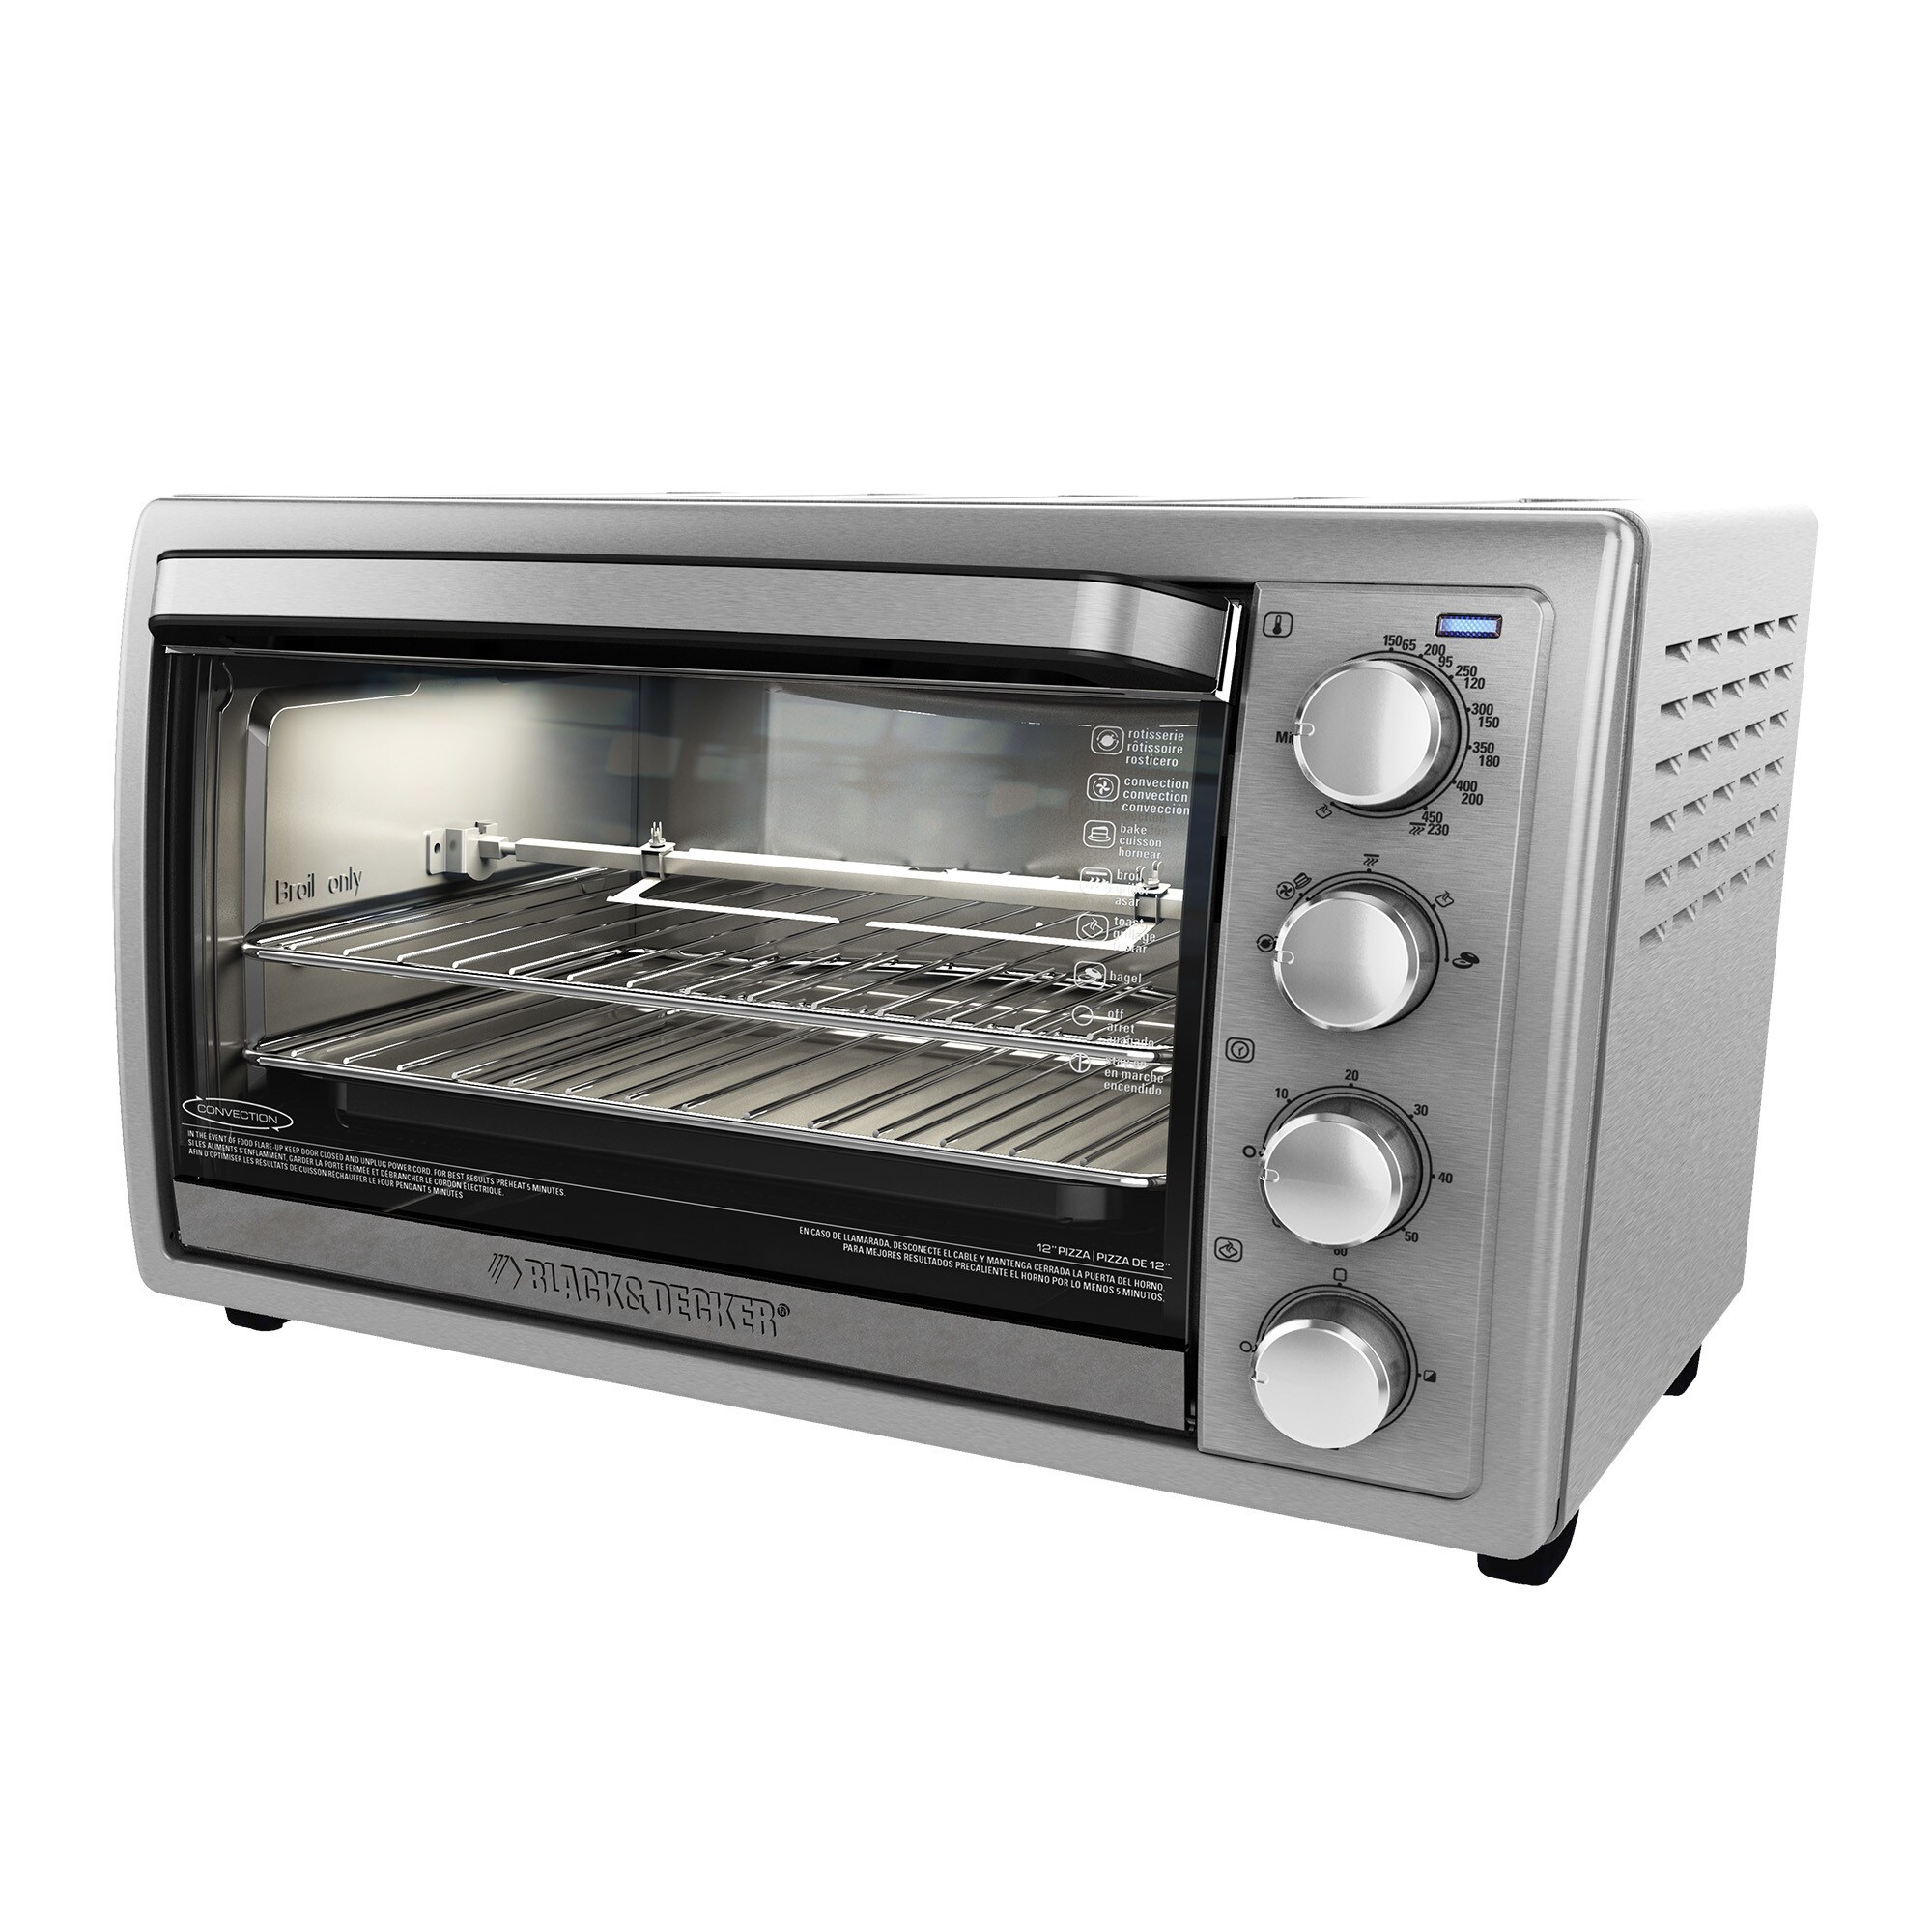 Fast Ship Stainless Steel Finish Brand New 6-Slice Counter top Toaster Oven 